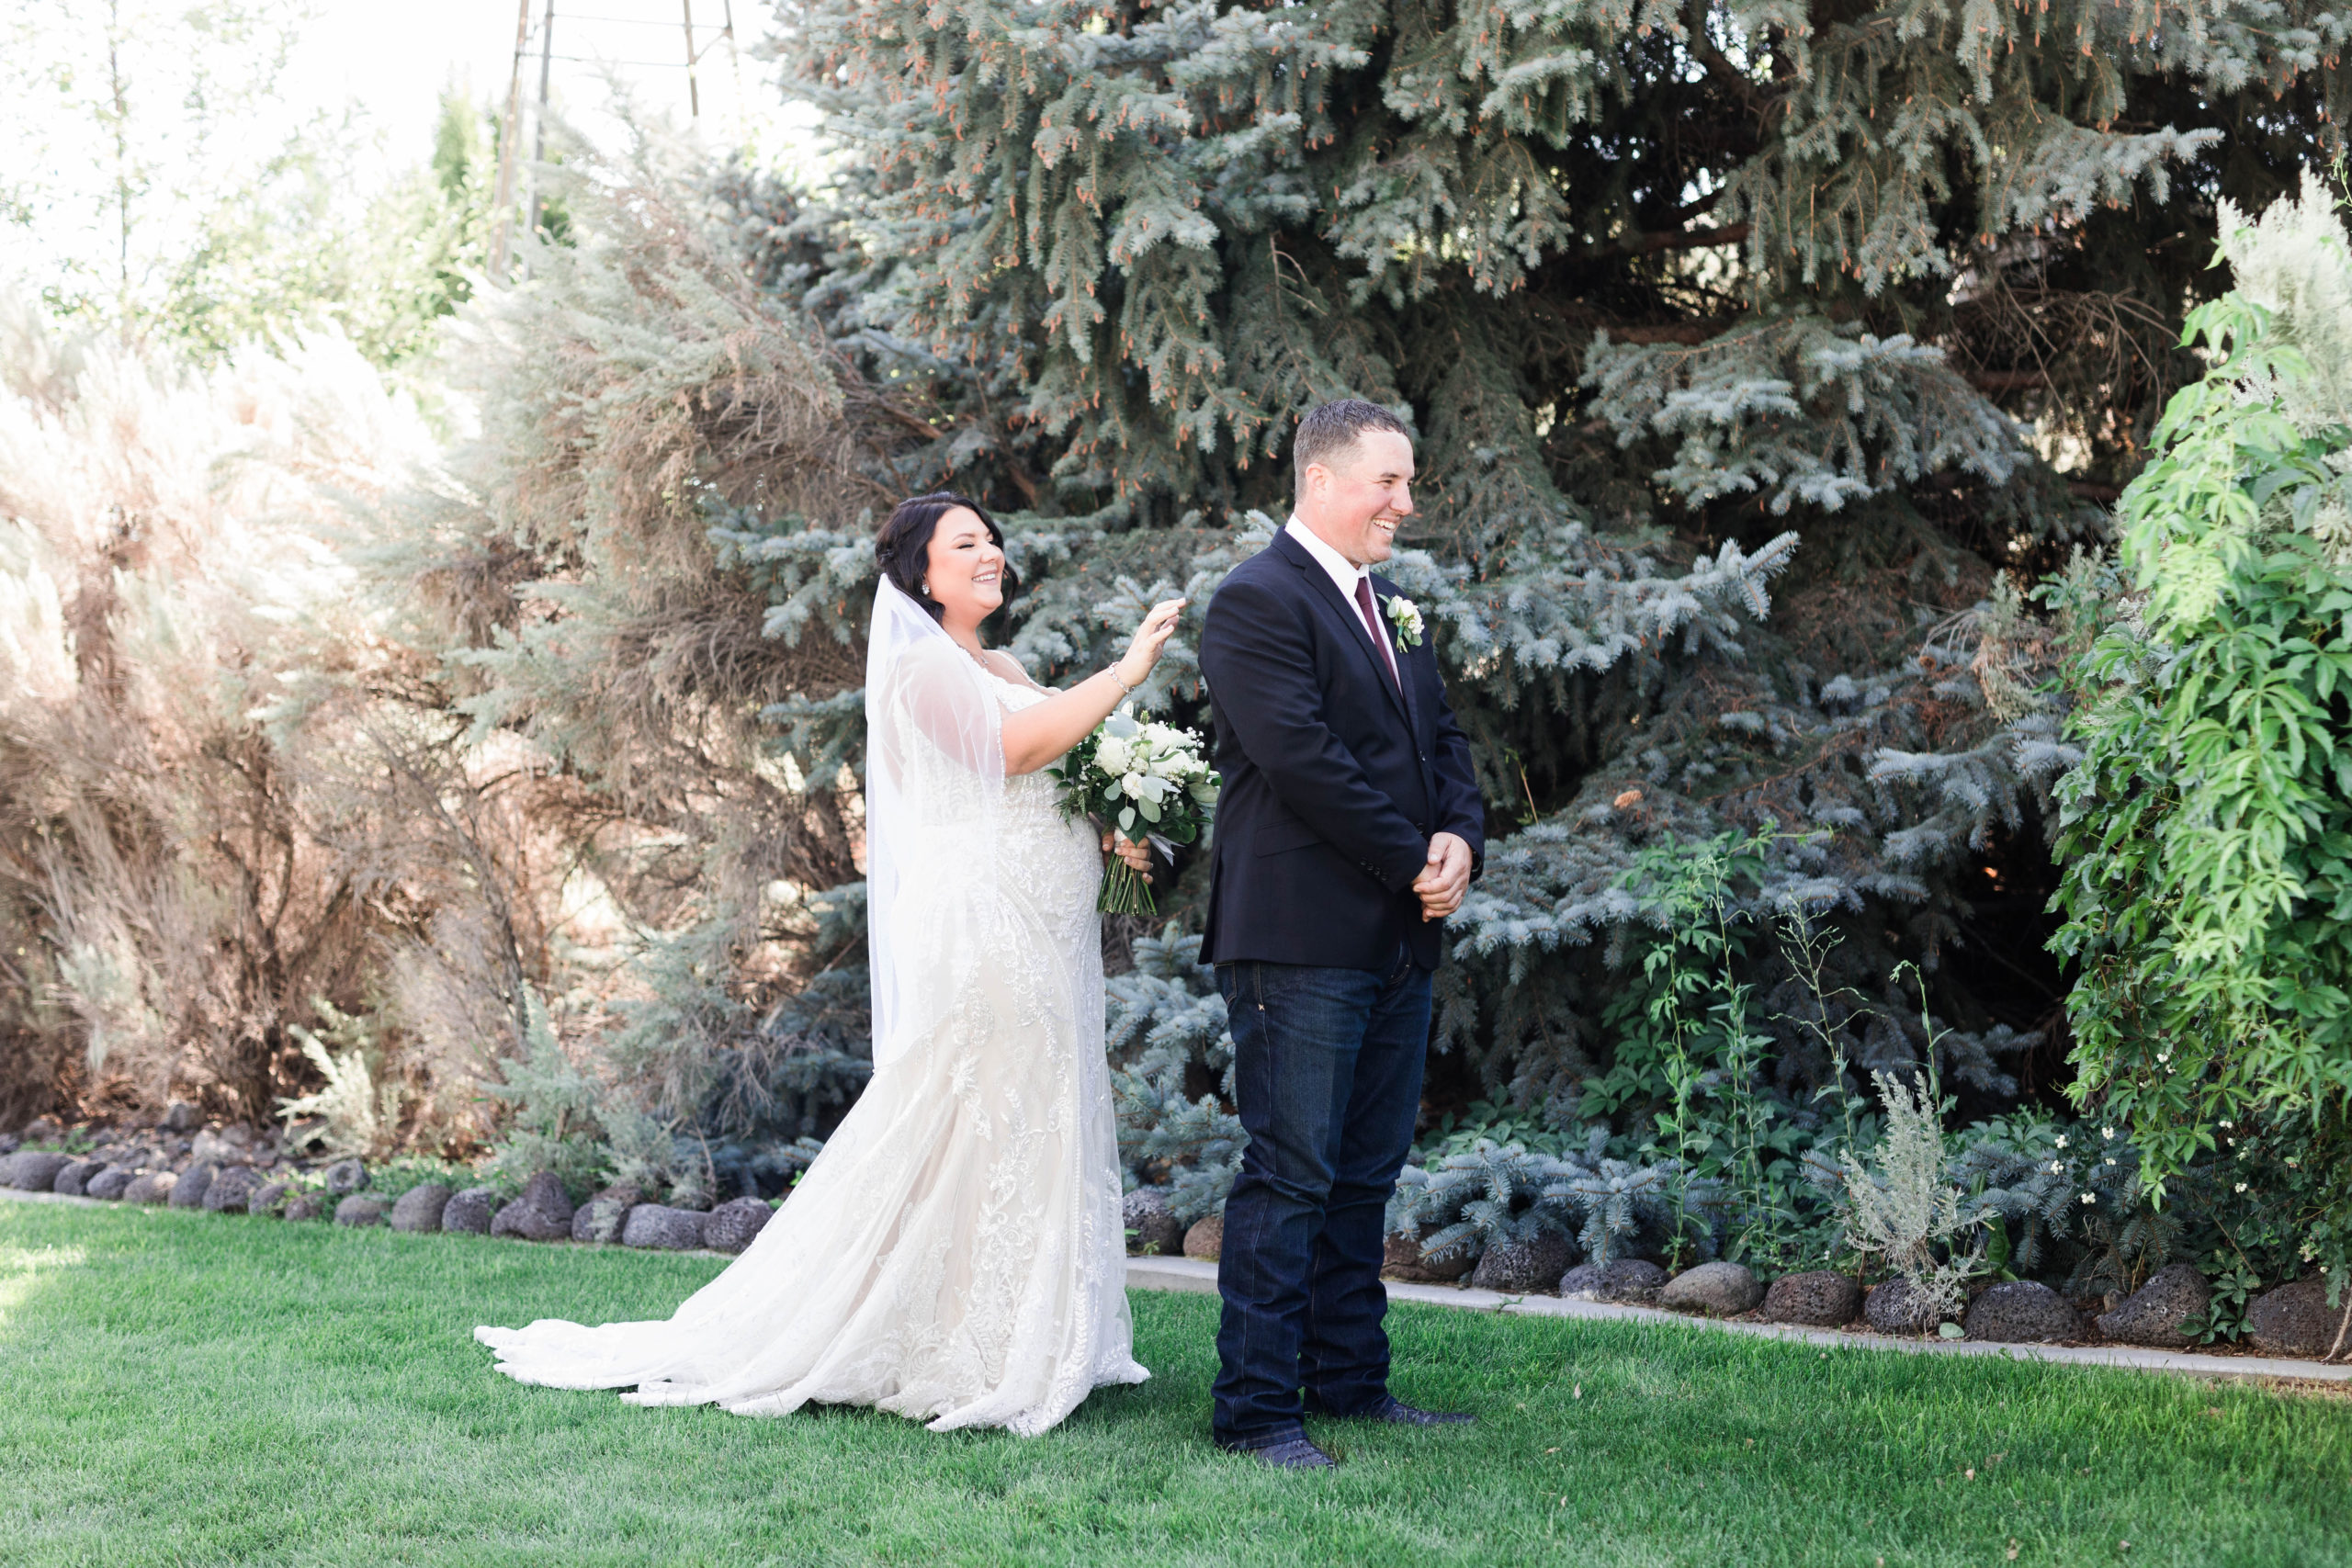 Boise wedding photographer captures bride and groom during first look